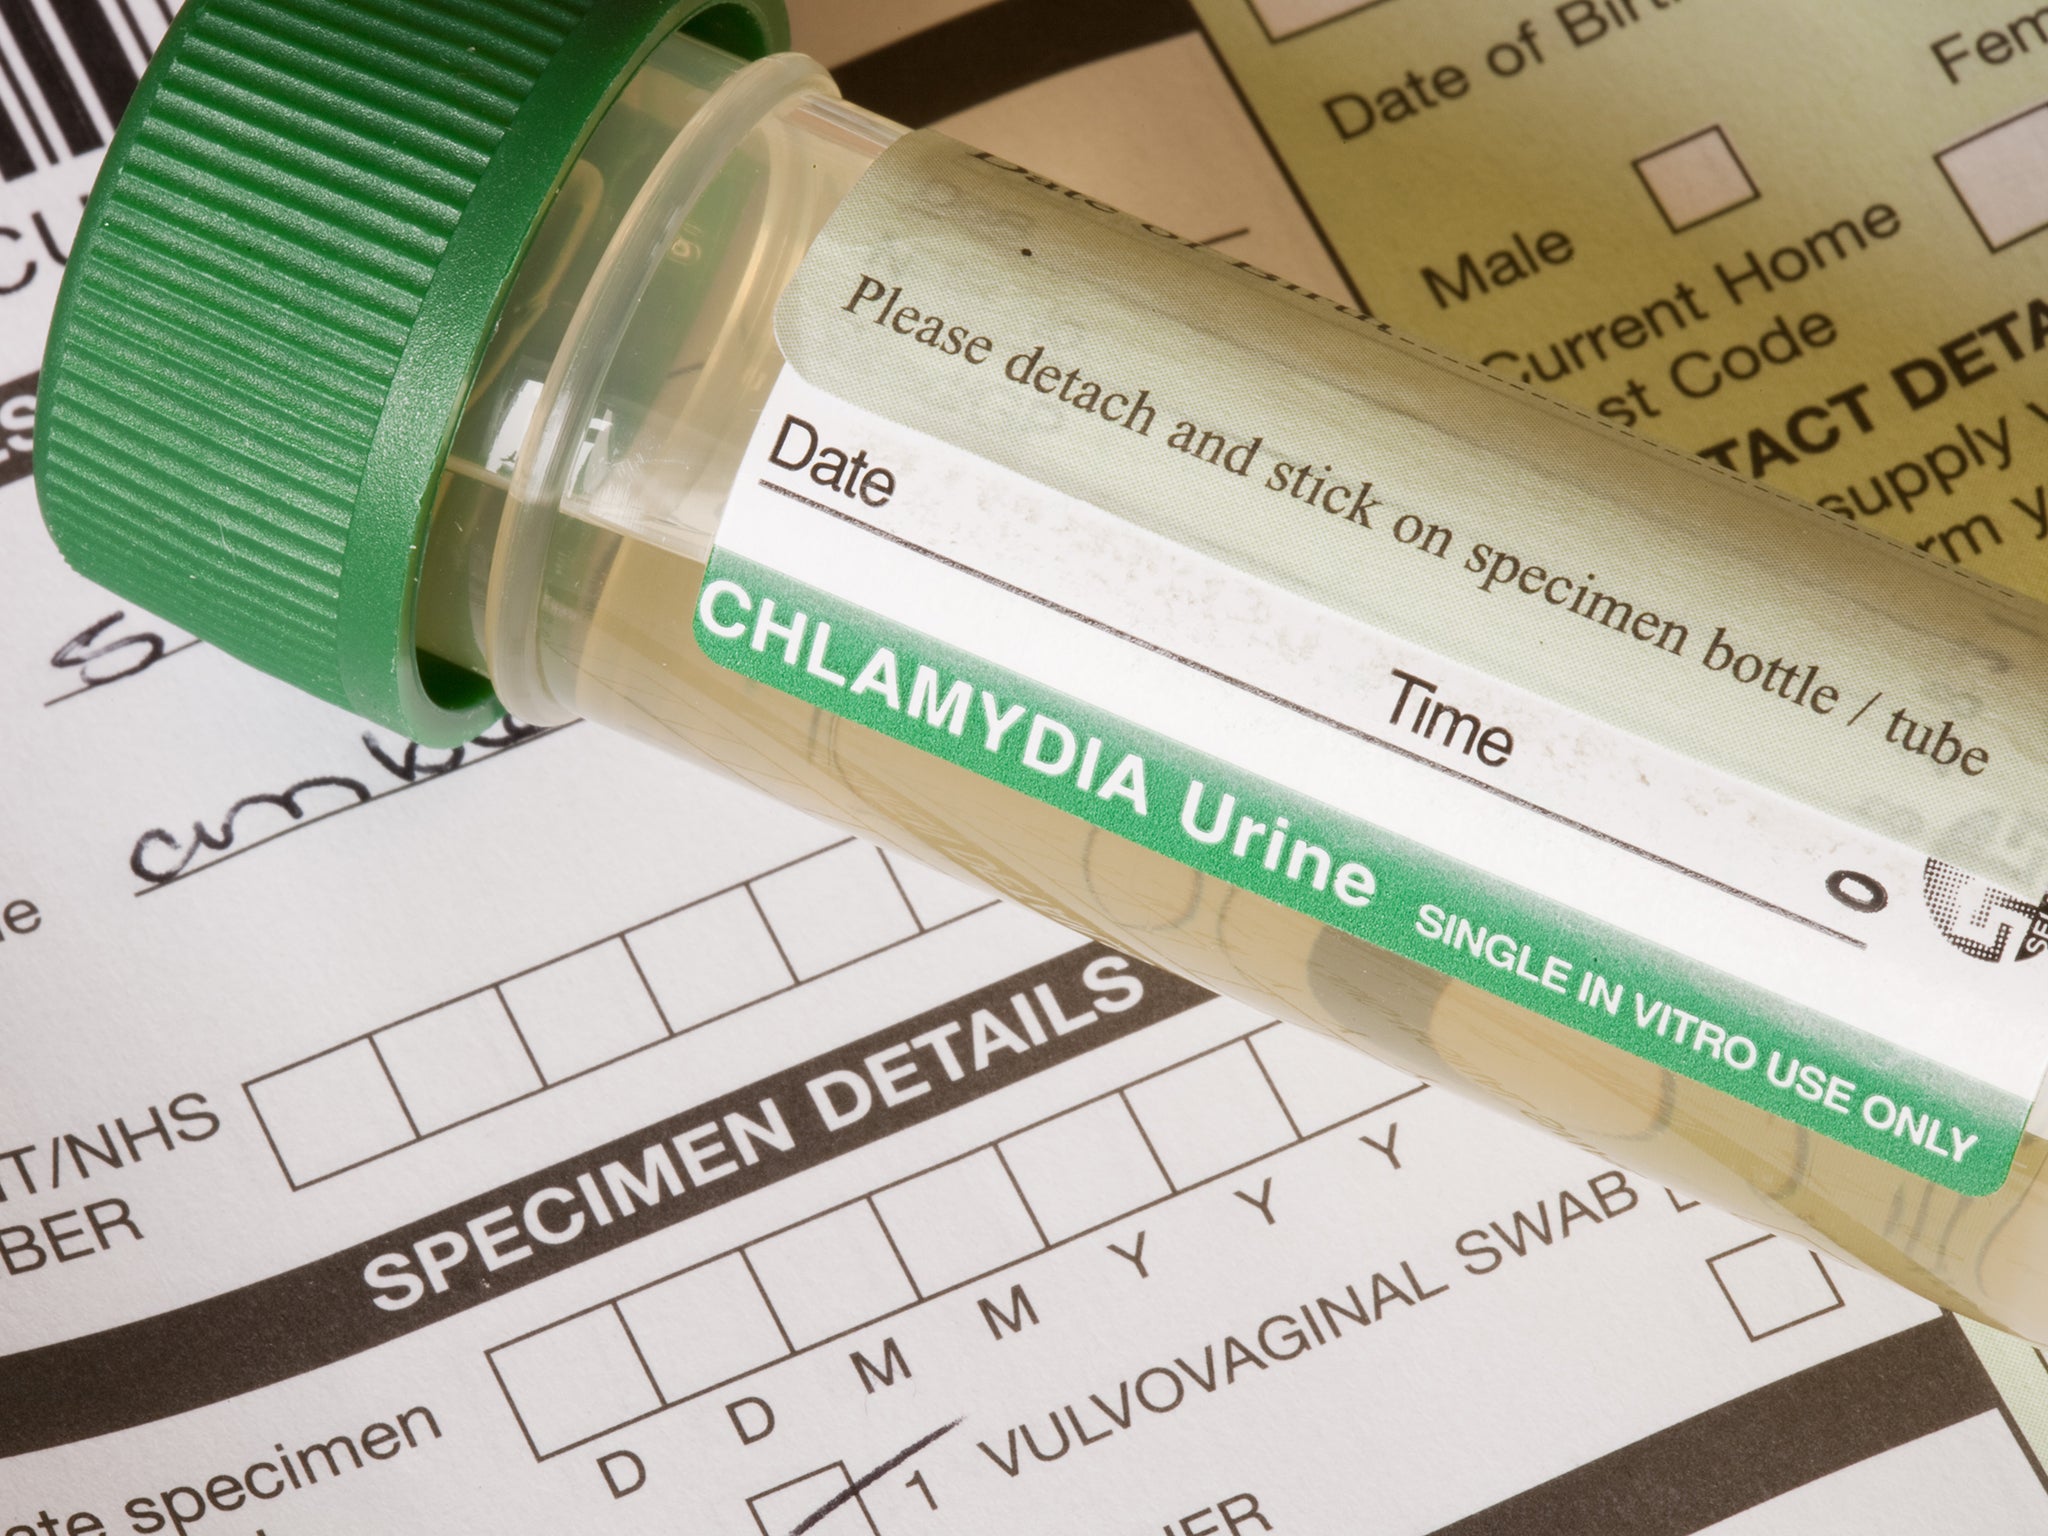 Chlamydia is extremely common. Around the world an estimated 100 million are infected each year